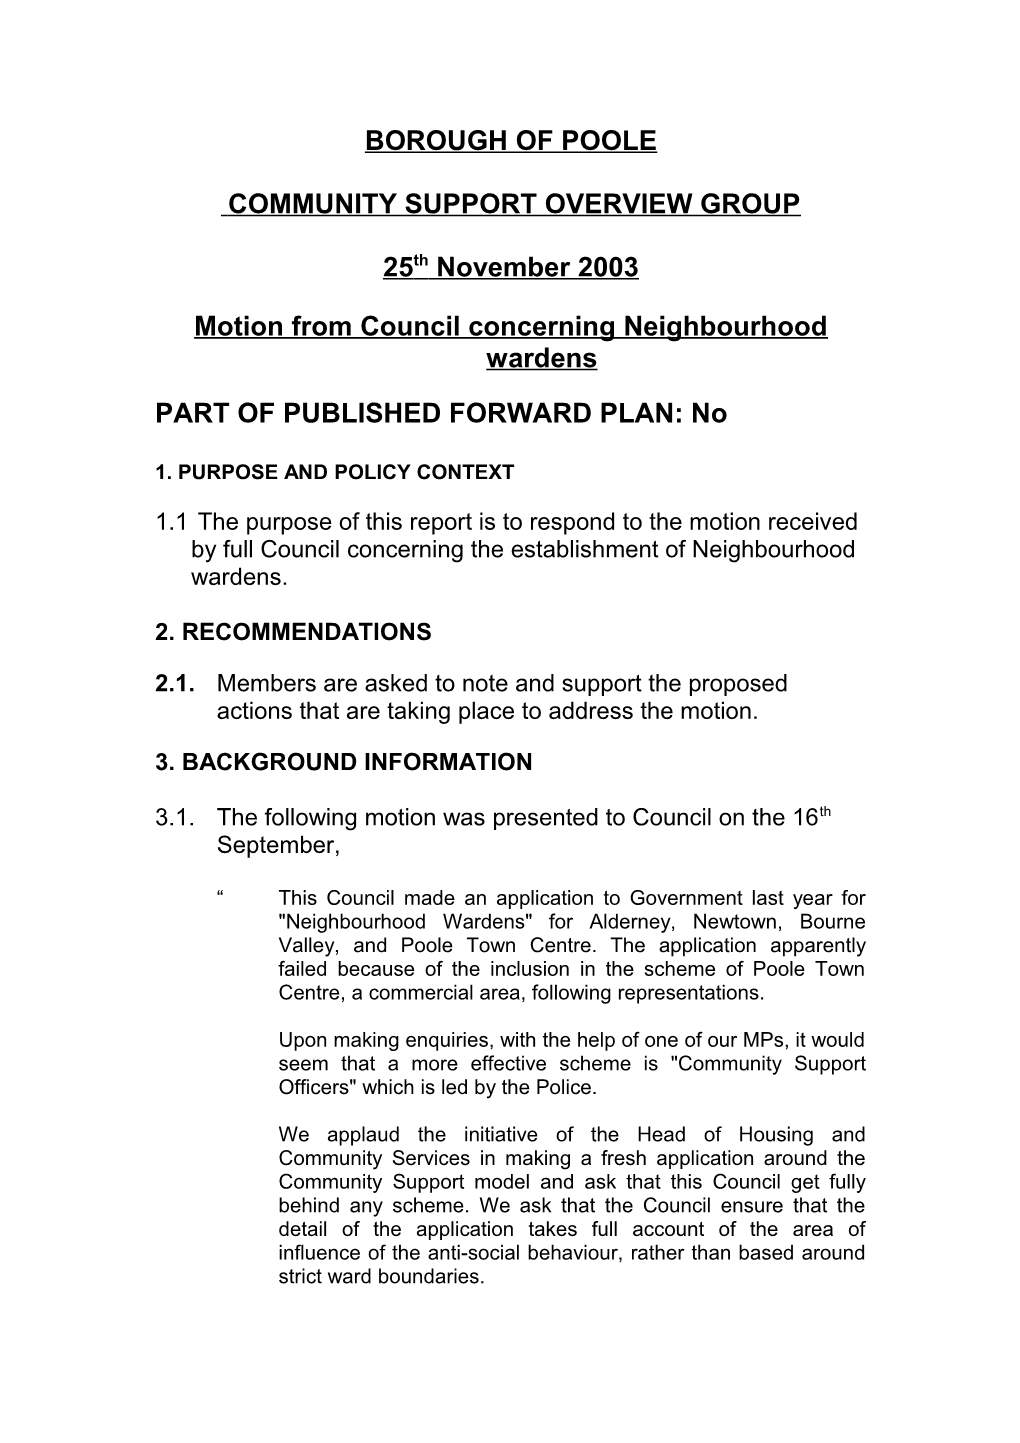 Motion from Council Concerning Neighbourhood Wardens